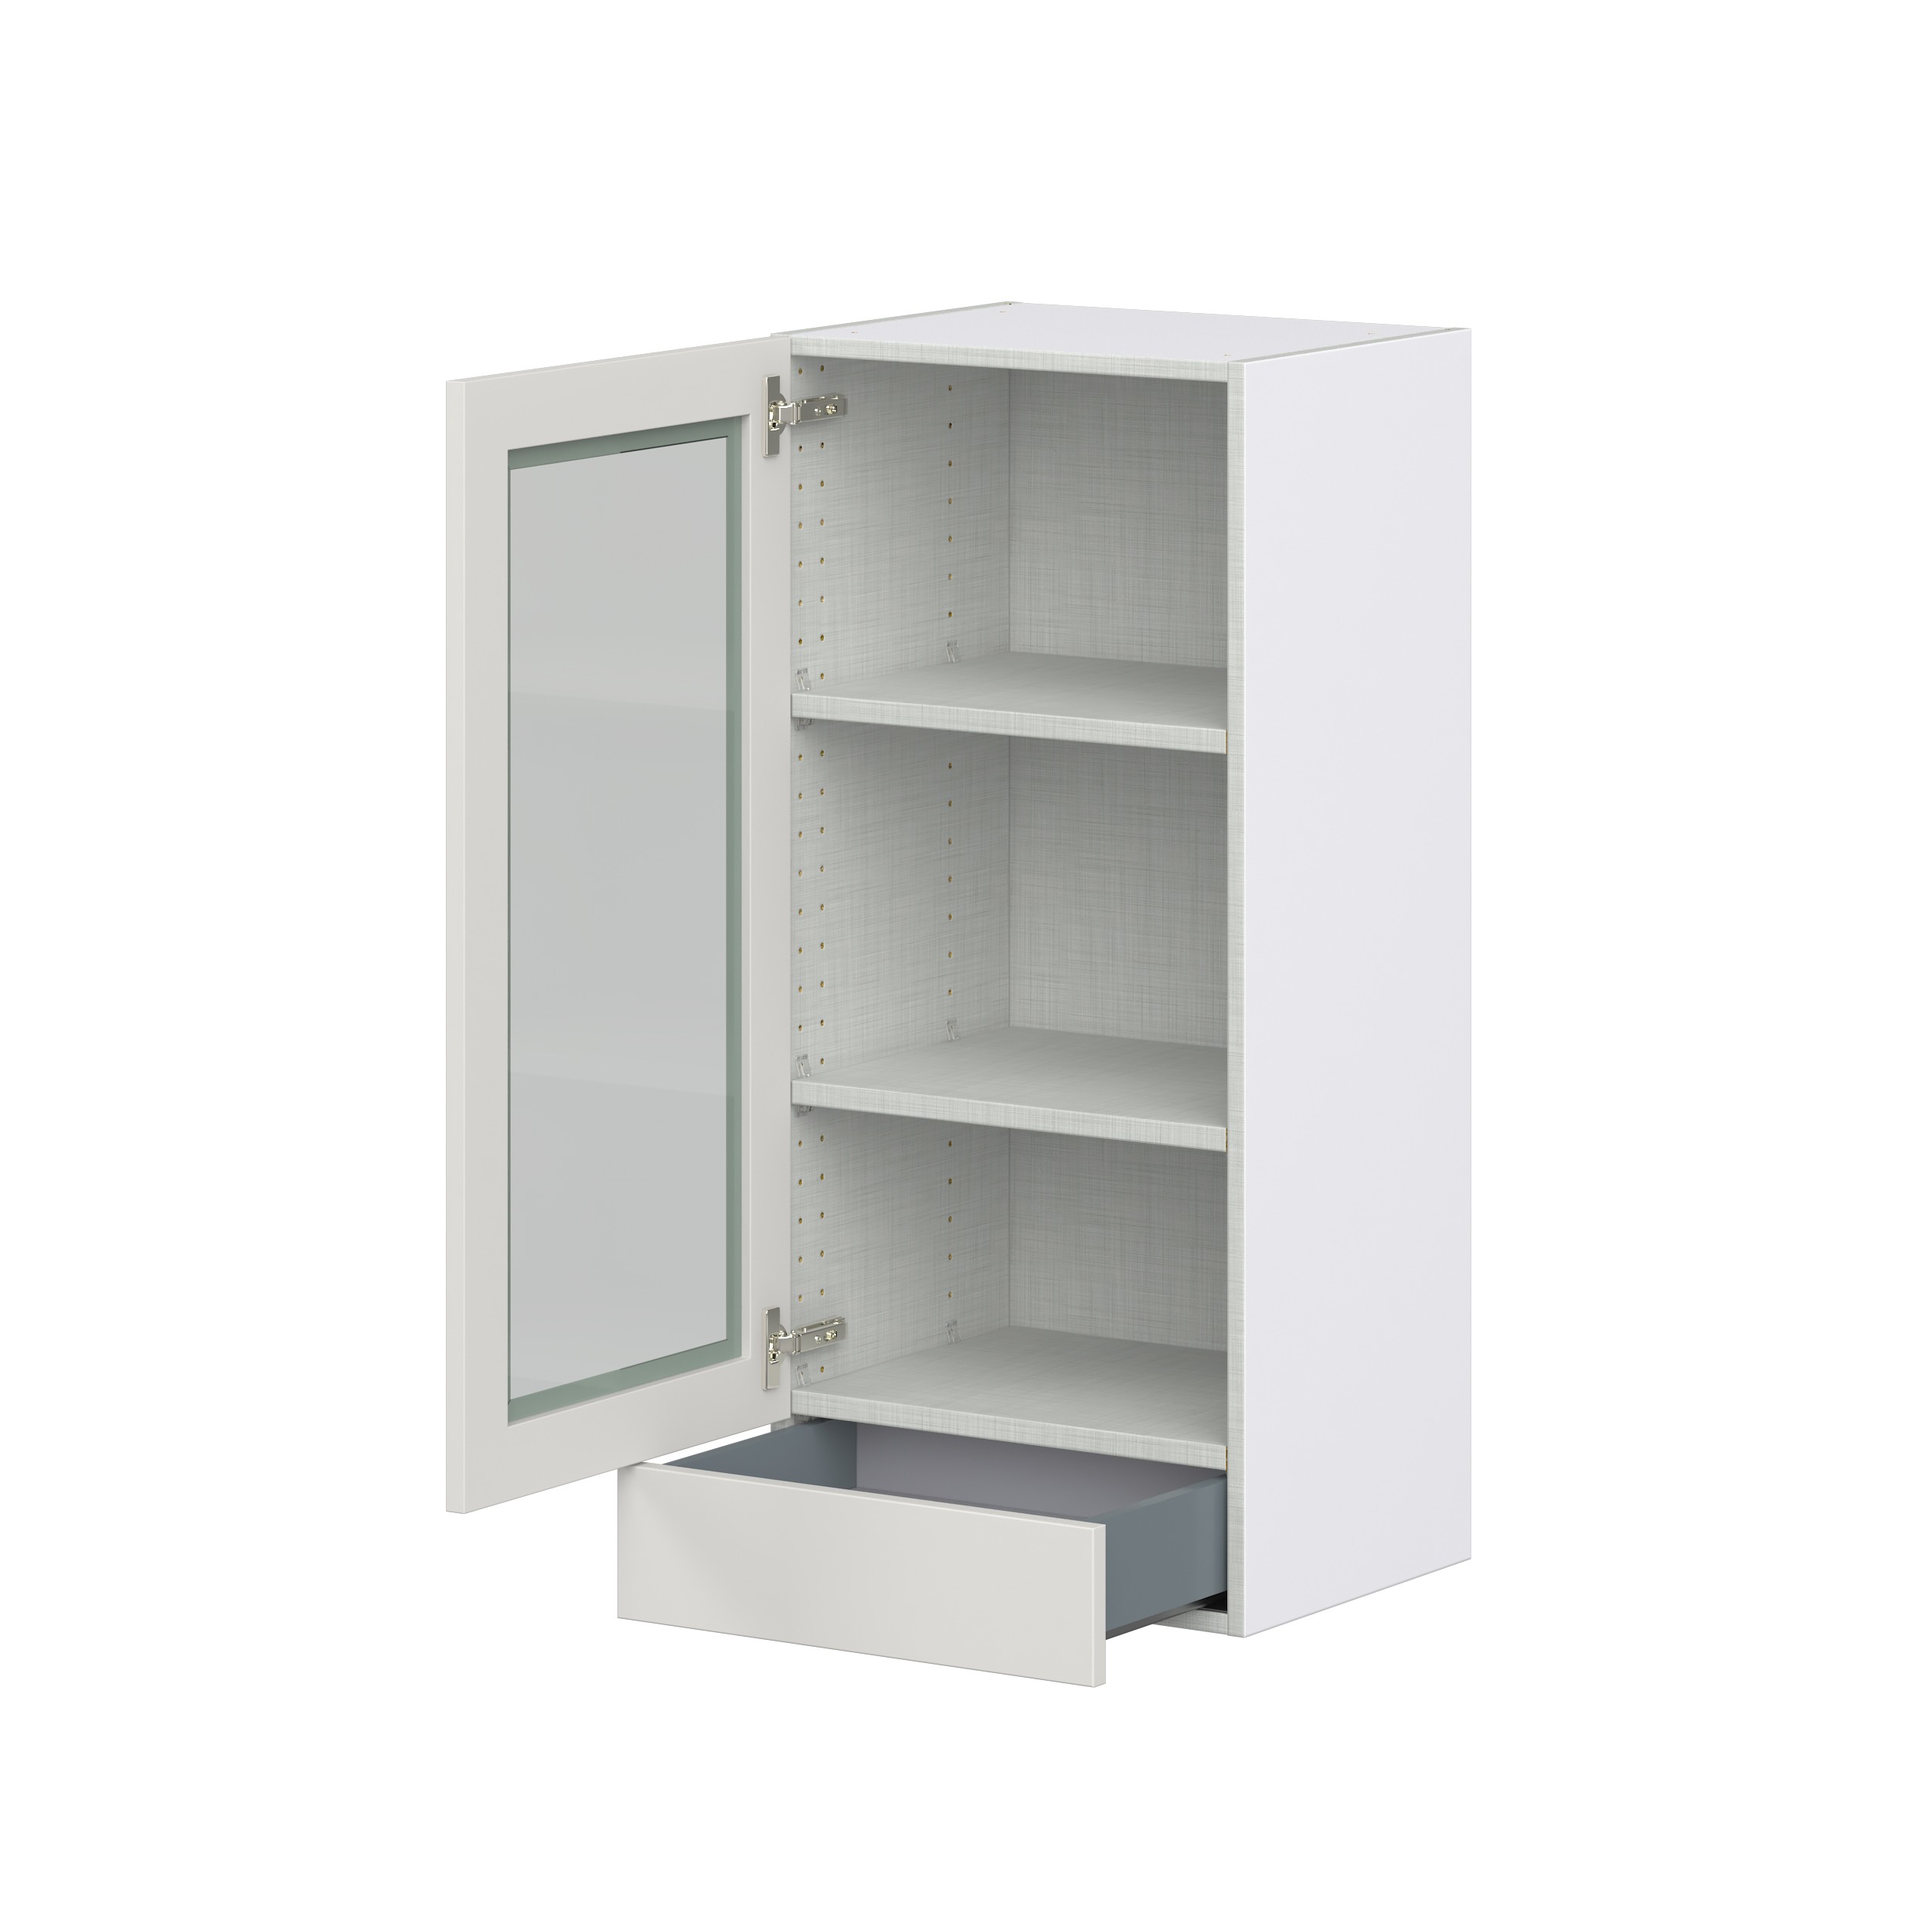 Wisteria Painted Light Gray Recessed Assembled Wall Cabinet with a Glass Door and a 5 in. Drawer (18 in. W x 40 in. H x 14 in. D)